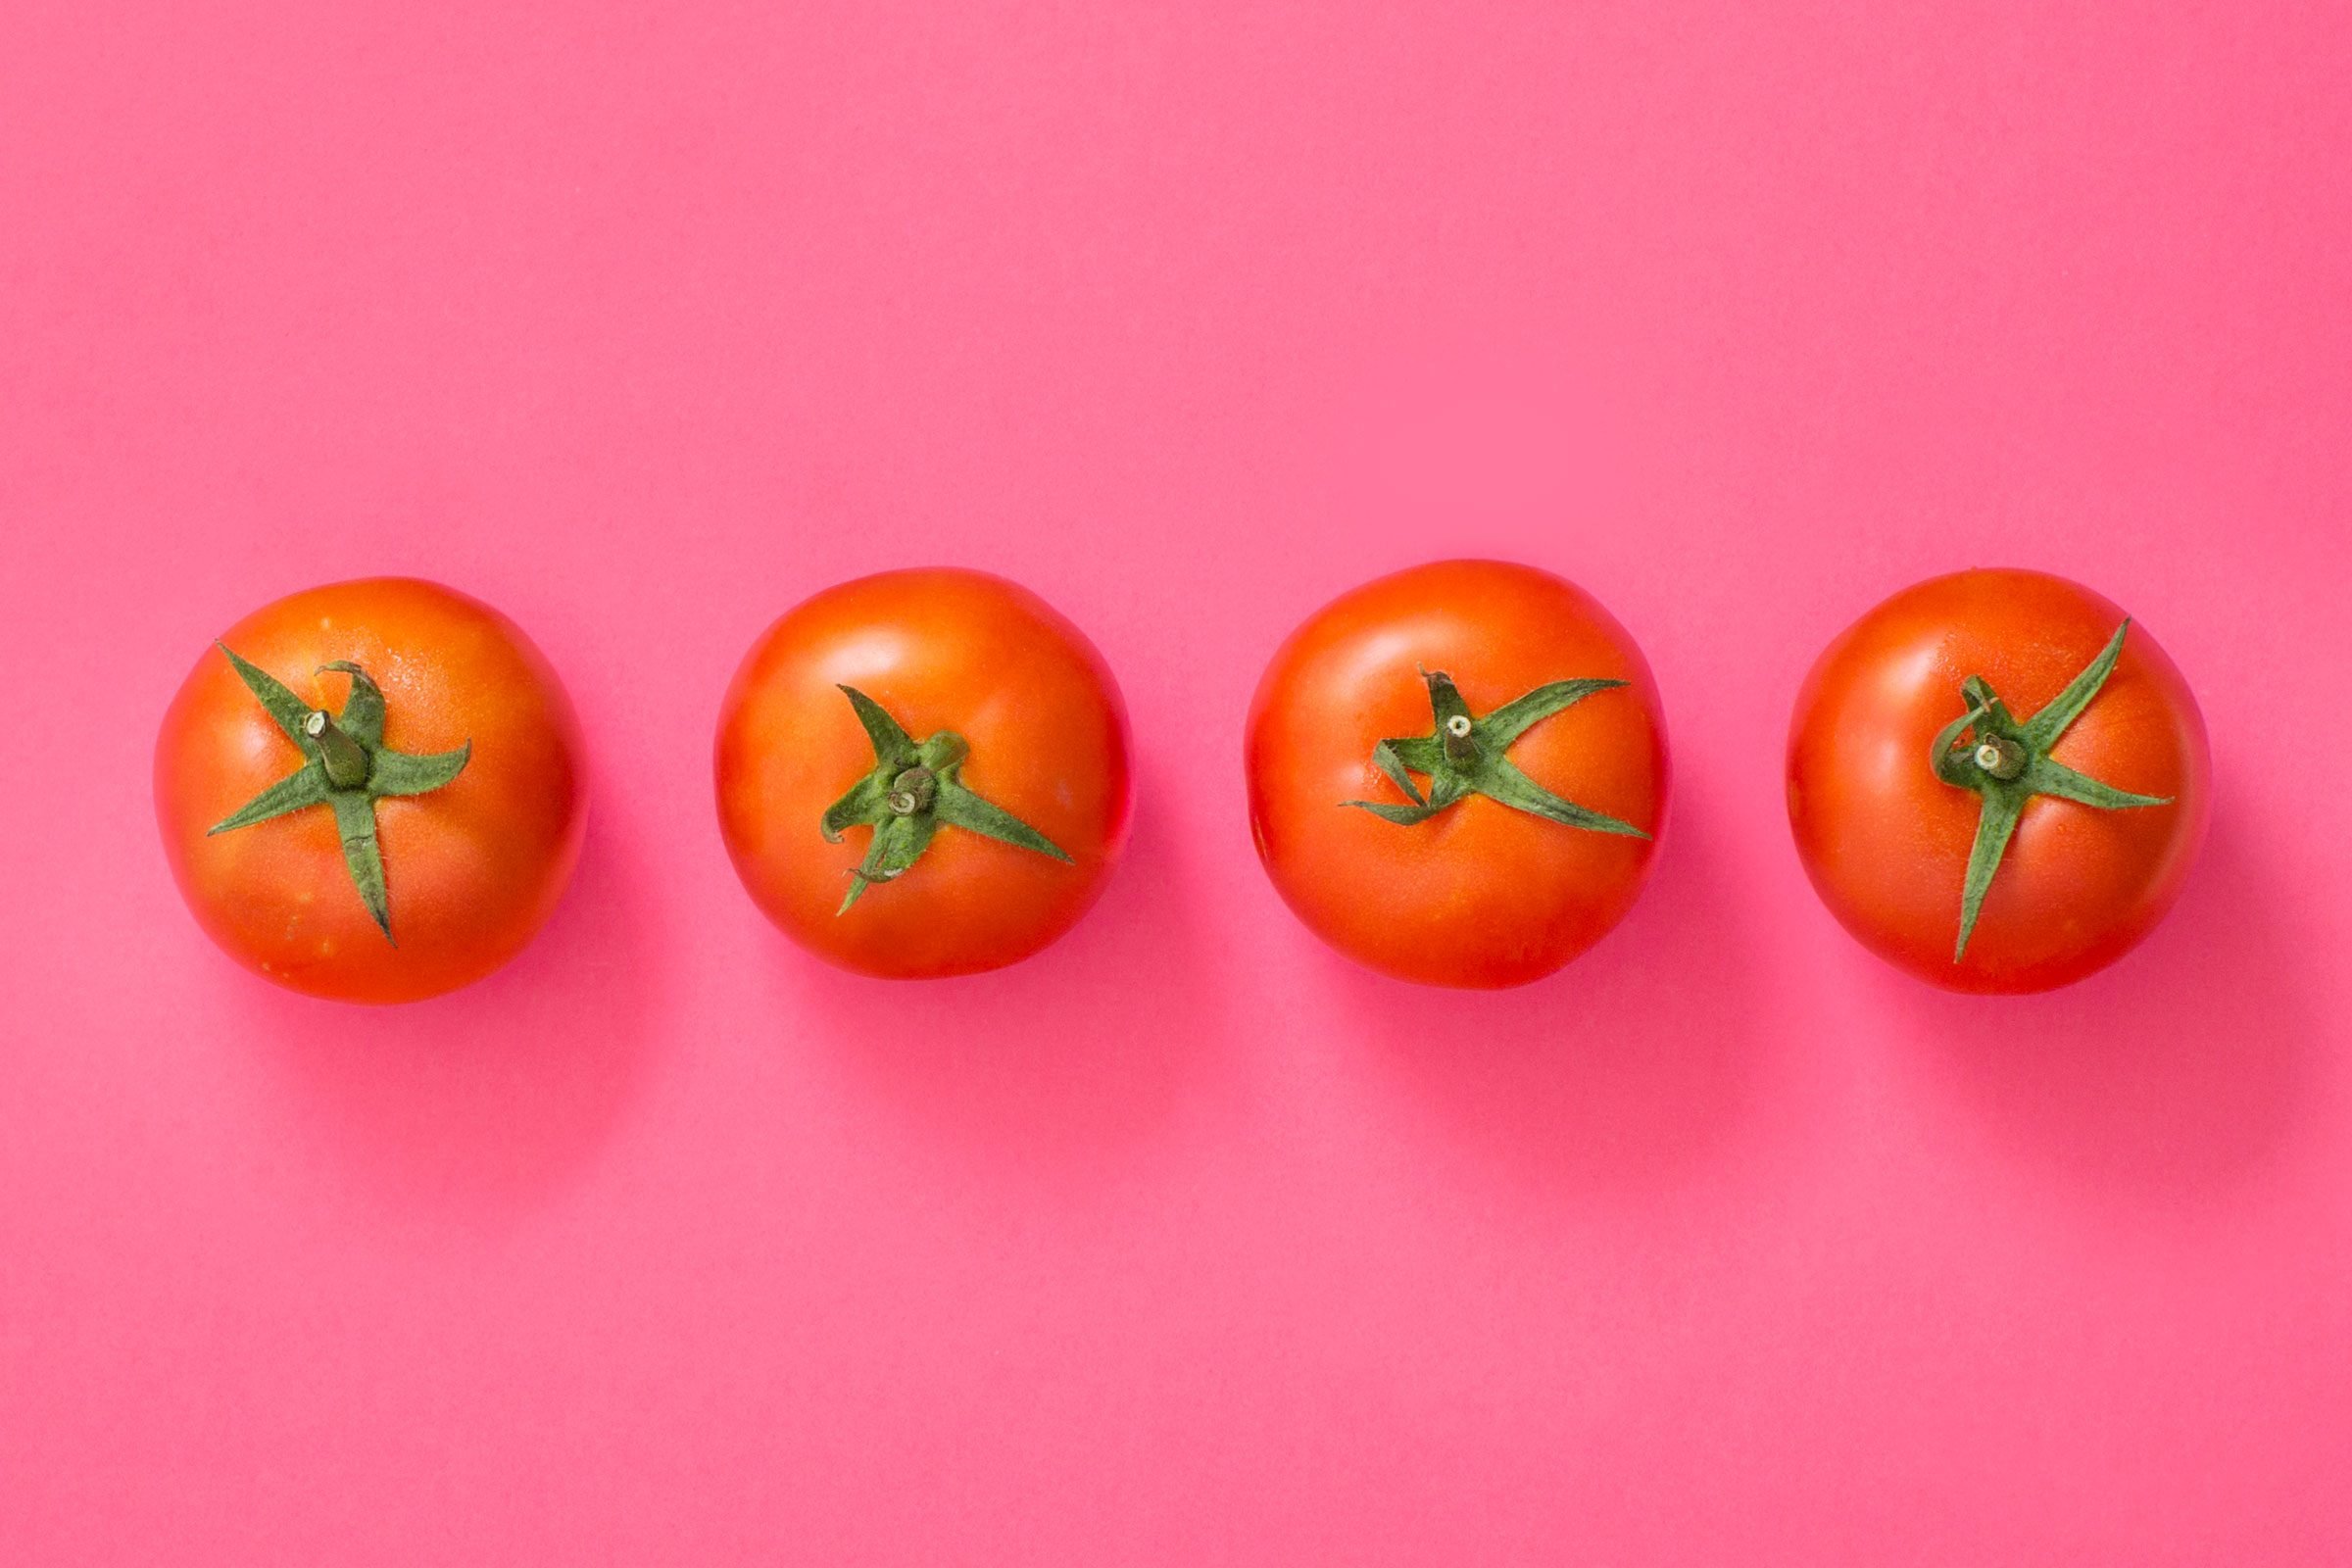 10 fruits and vegetables that are technically the other way round